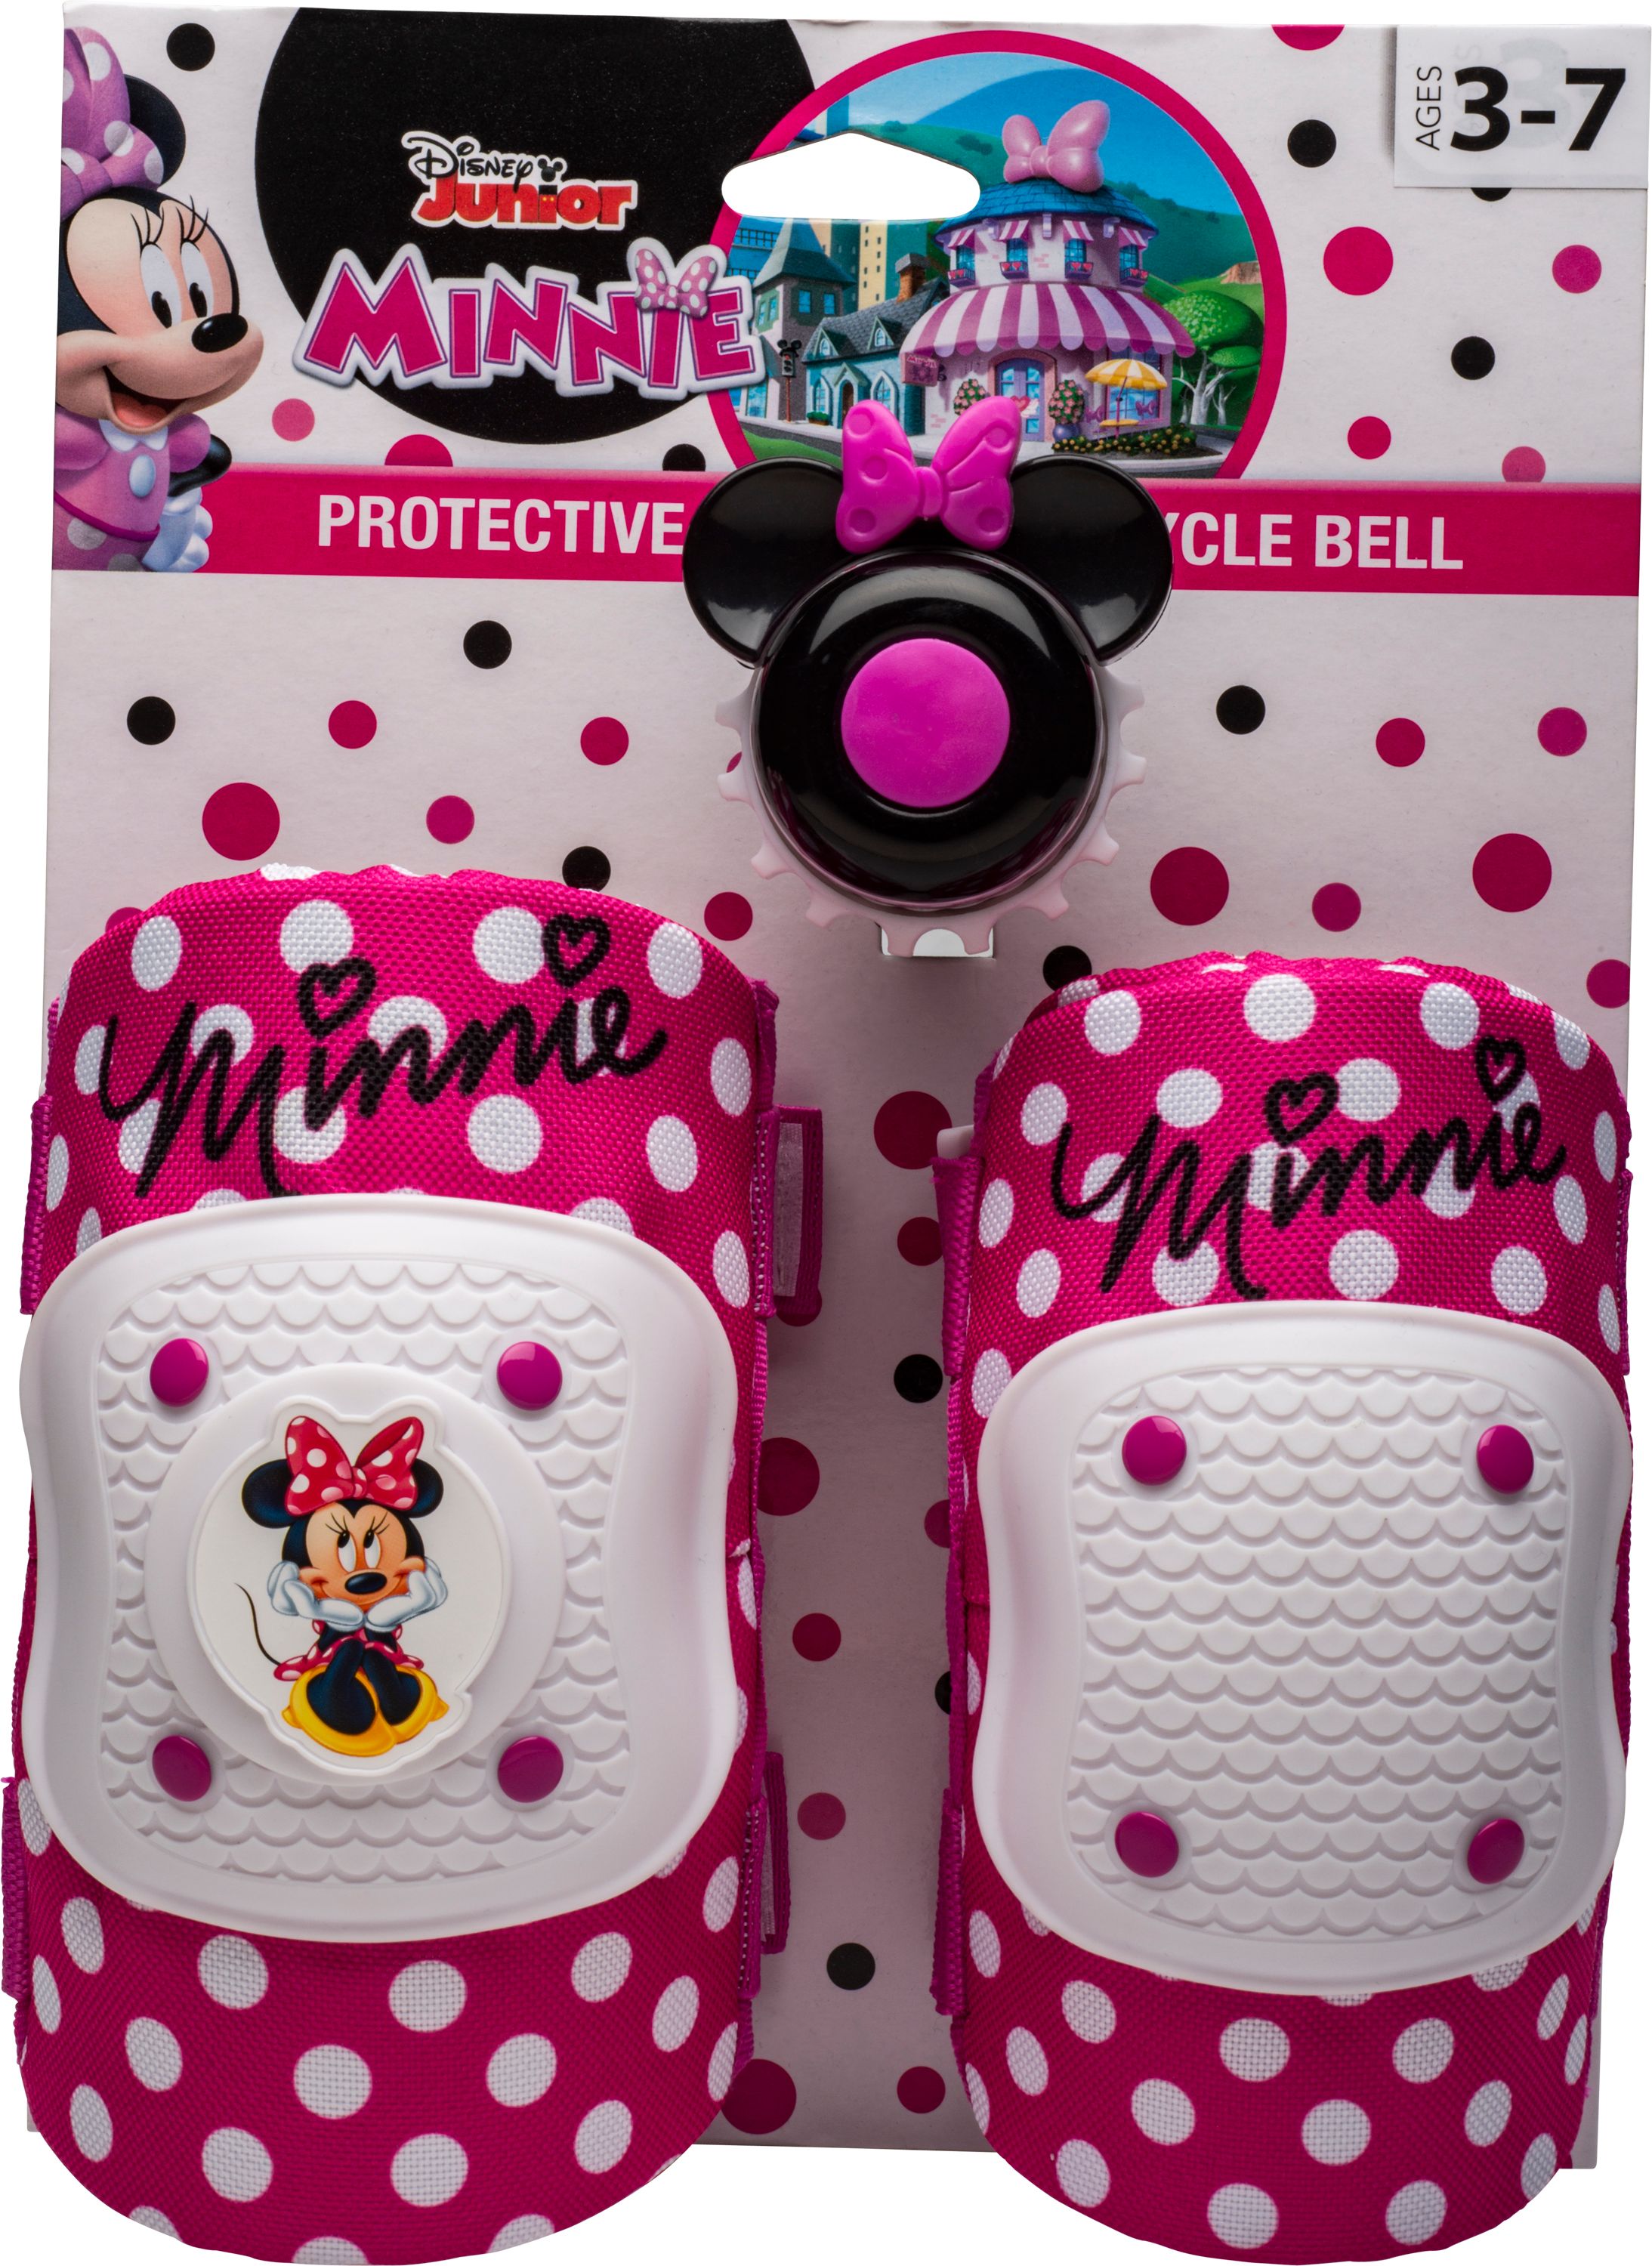 Disney Minnie Mouse Elbow & Knee Pad Set with Bike Bell Value Pack - image 4 of 5